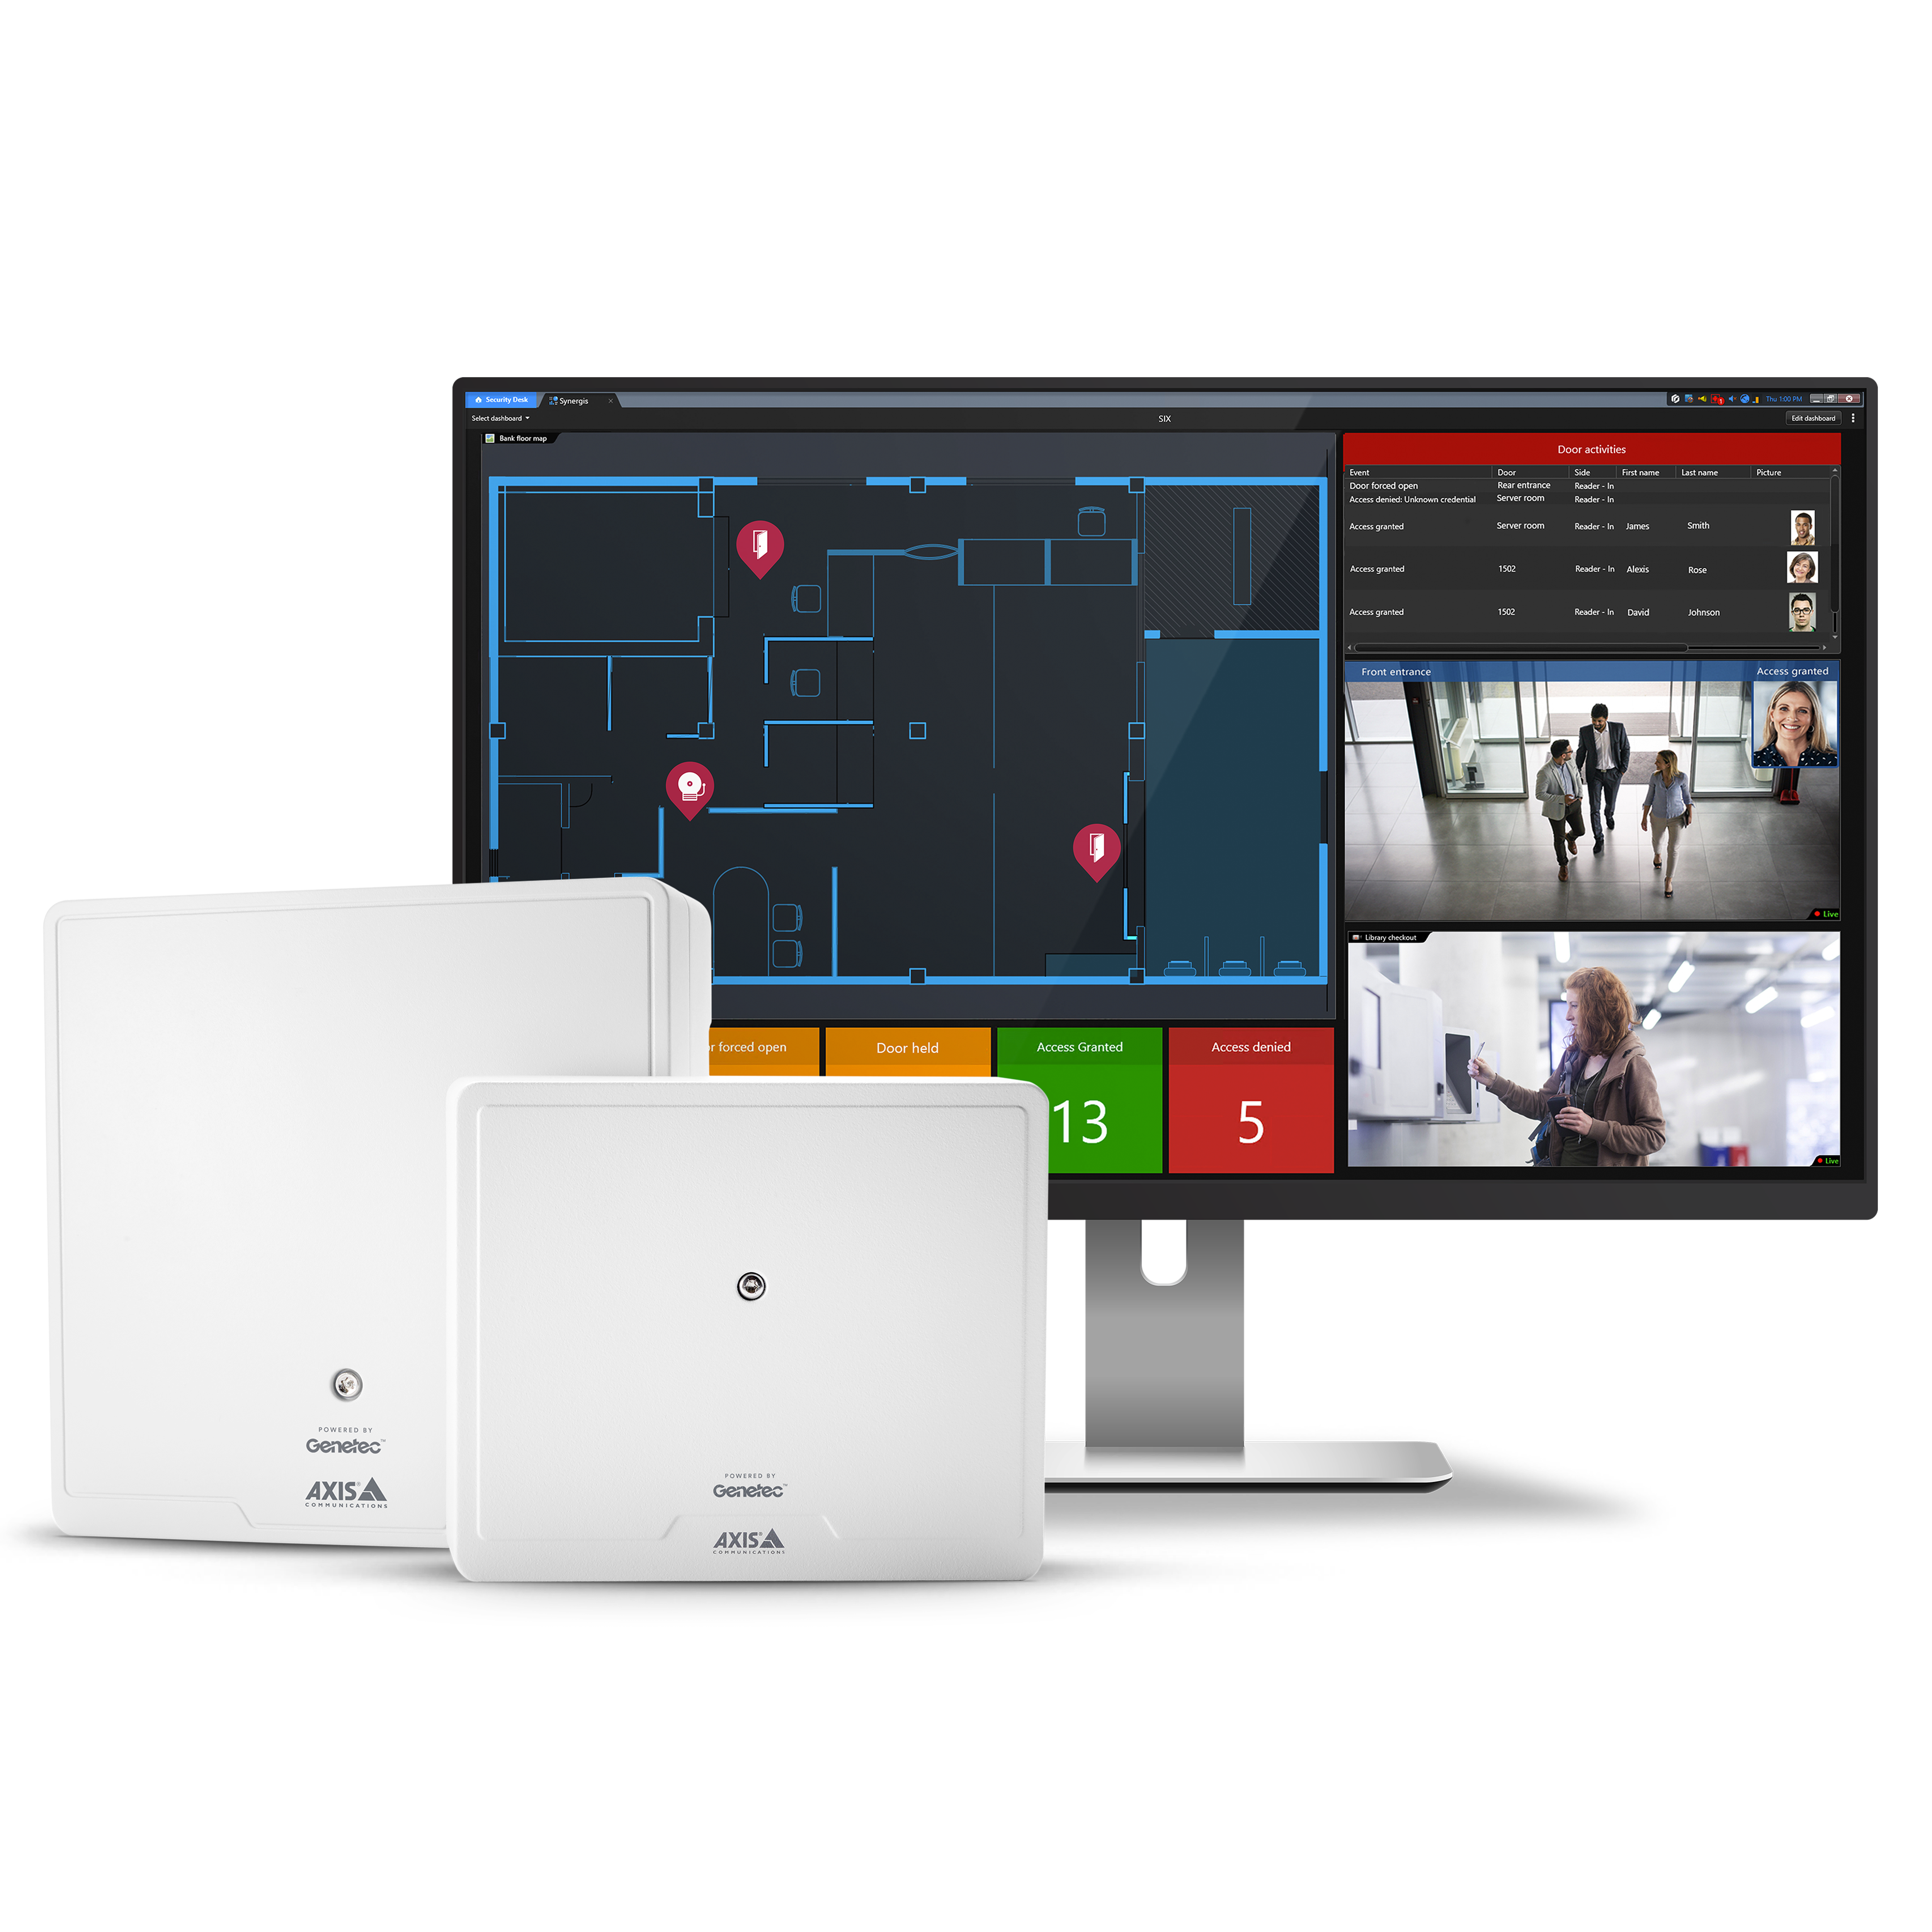 Axis Powered by Genetec Access Control Solution | Axis Communications